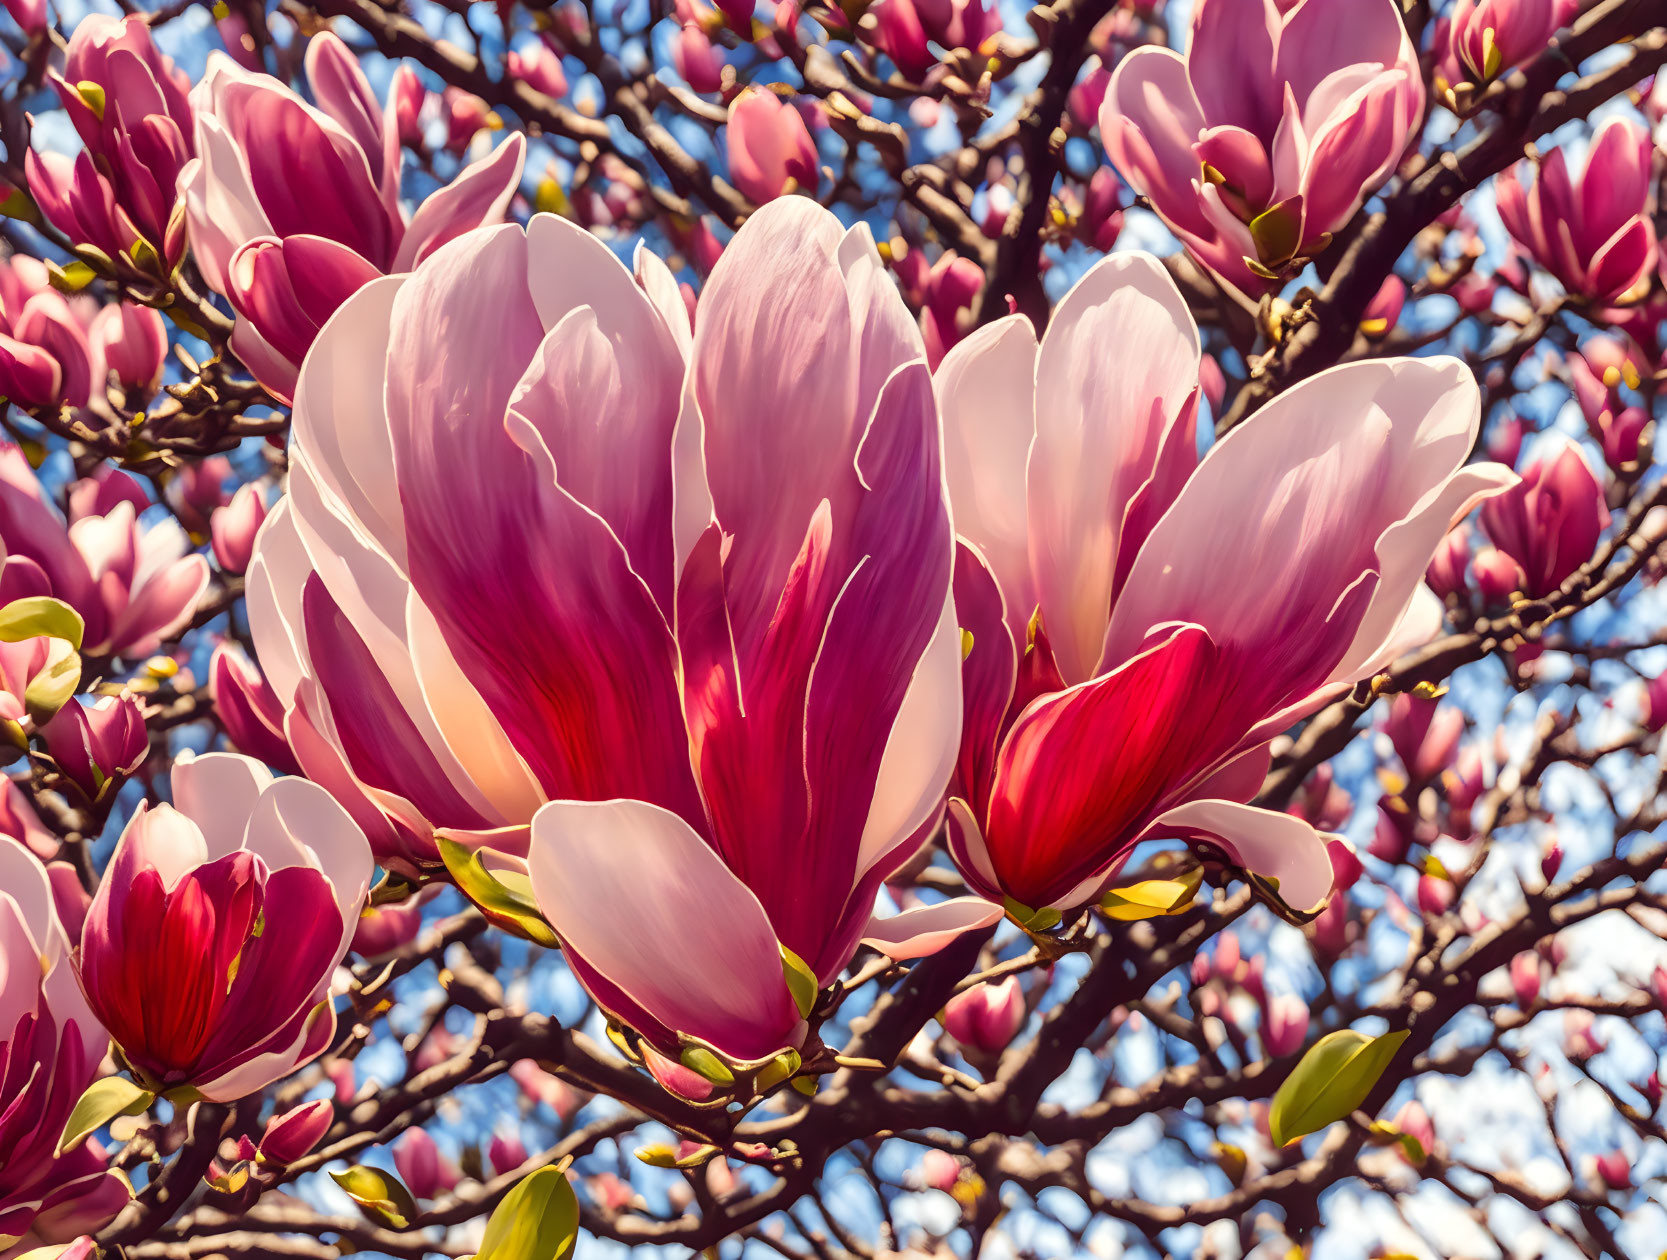 Vibrant pink and white magnolia blossoms in full bloom against blue sky